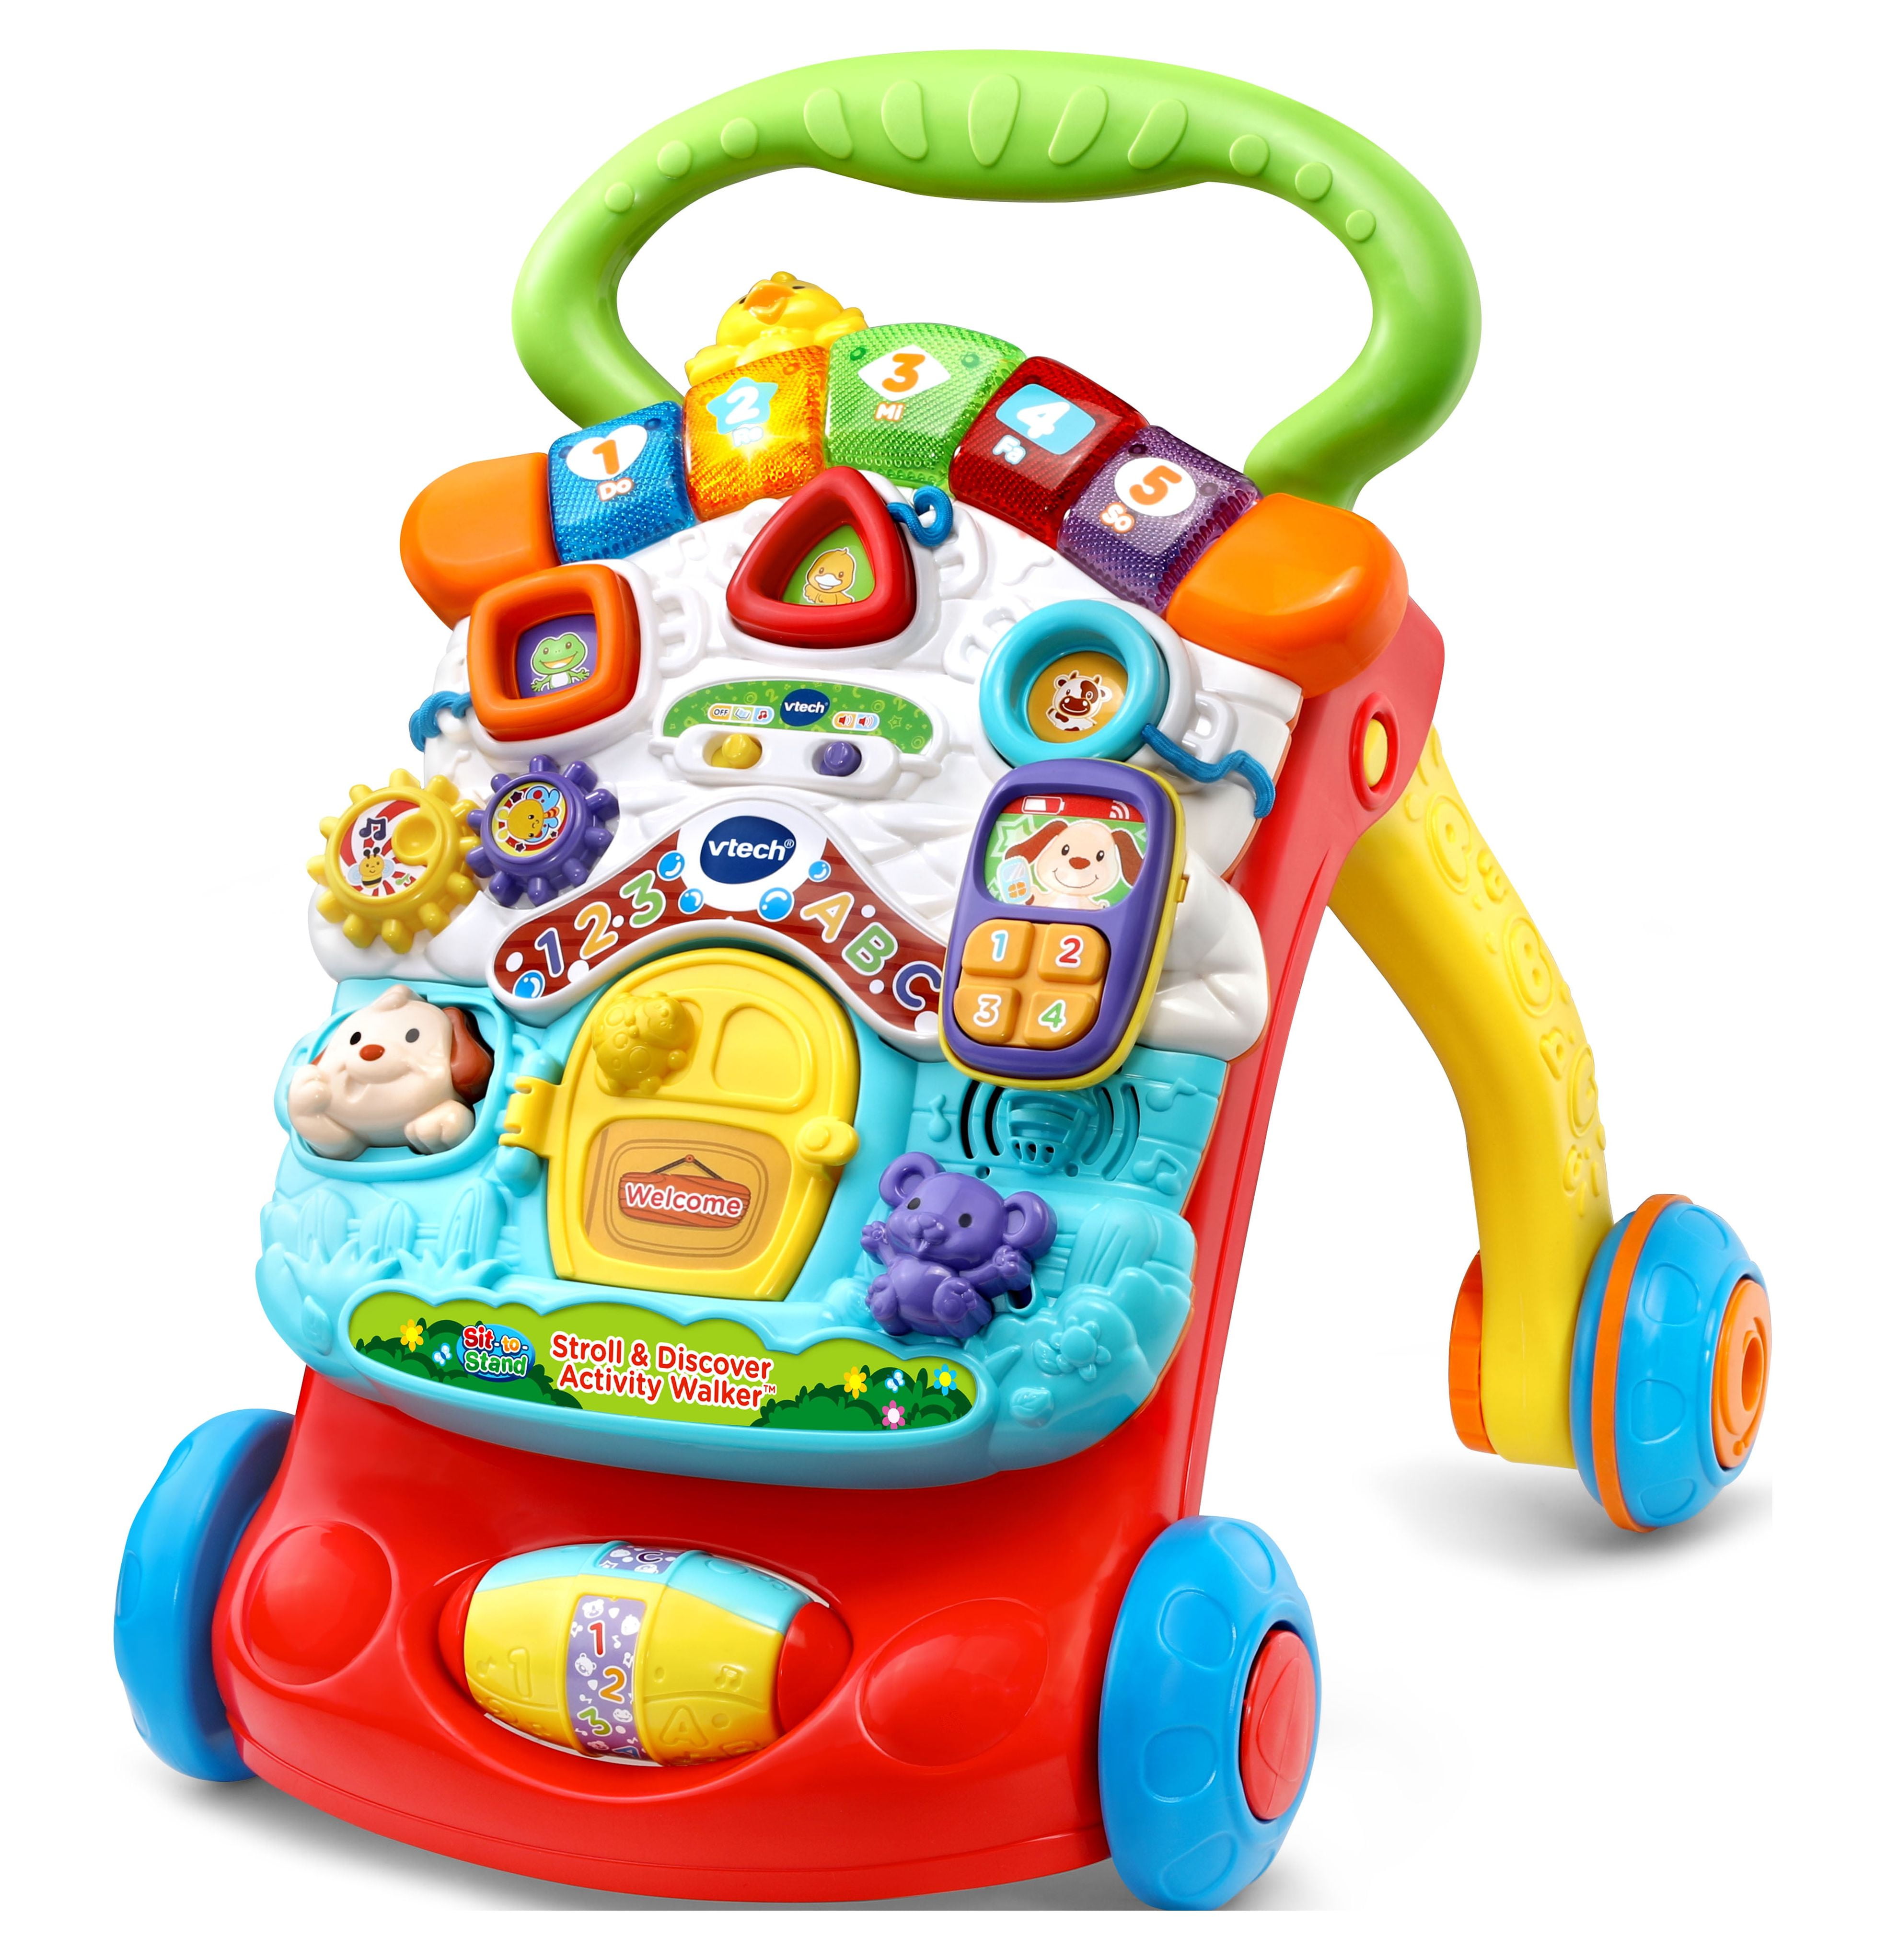 VTech® Stroll & Discover Activity Walker™ 2 -in-1 Unisex Toddler Toy, 9-36  Months 